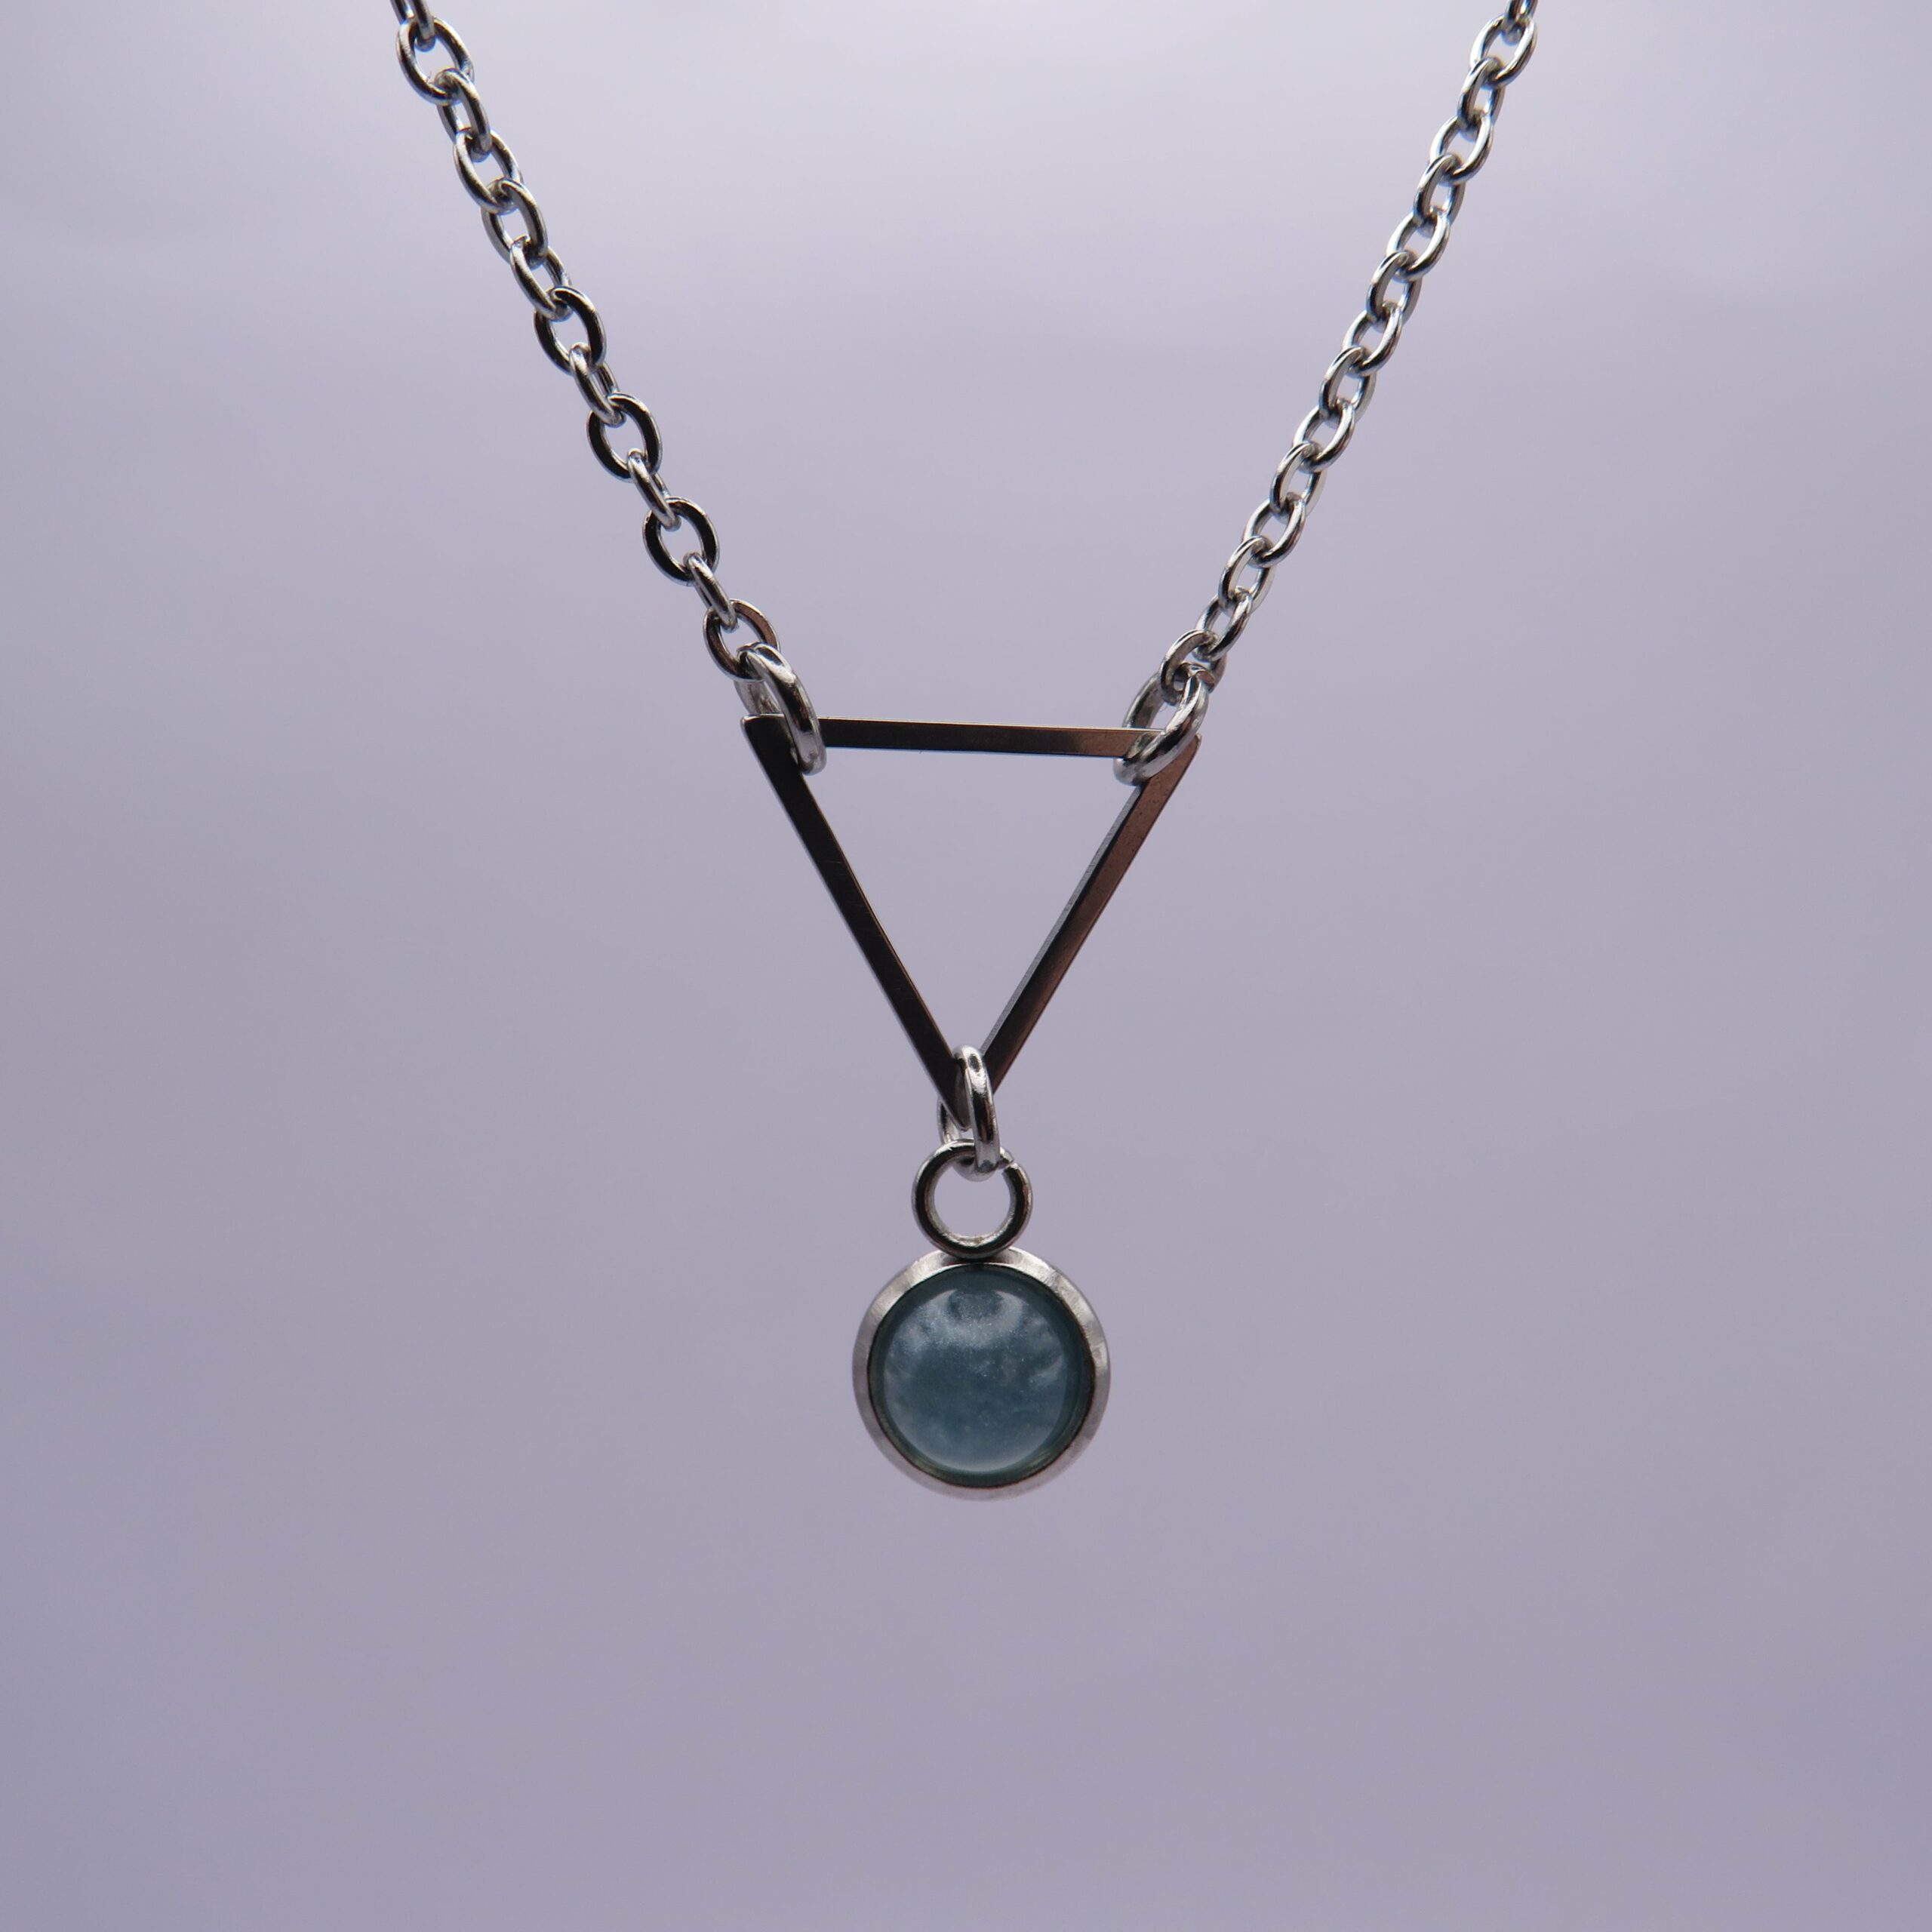 Stainless Steel Light Blue Cabochon Triangle Pendant Necklace